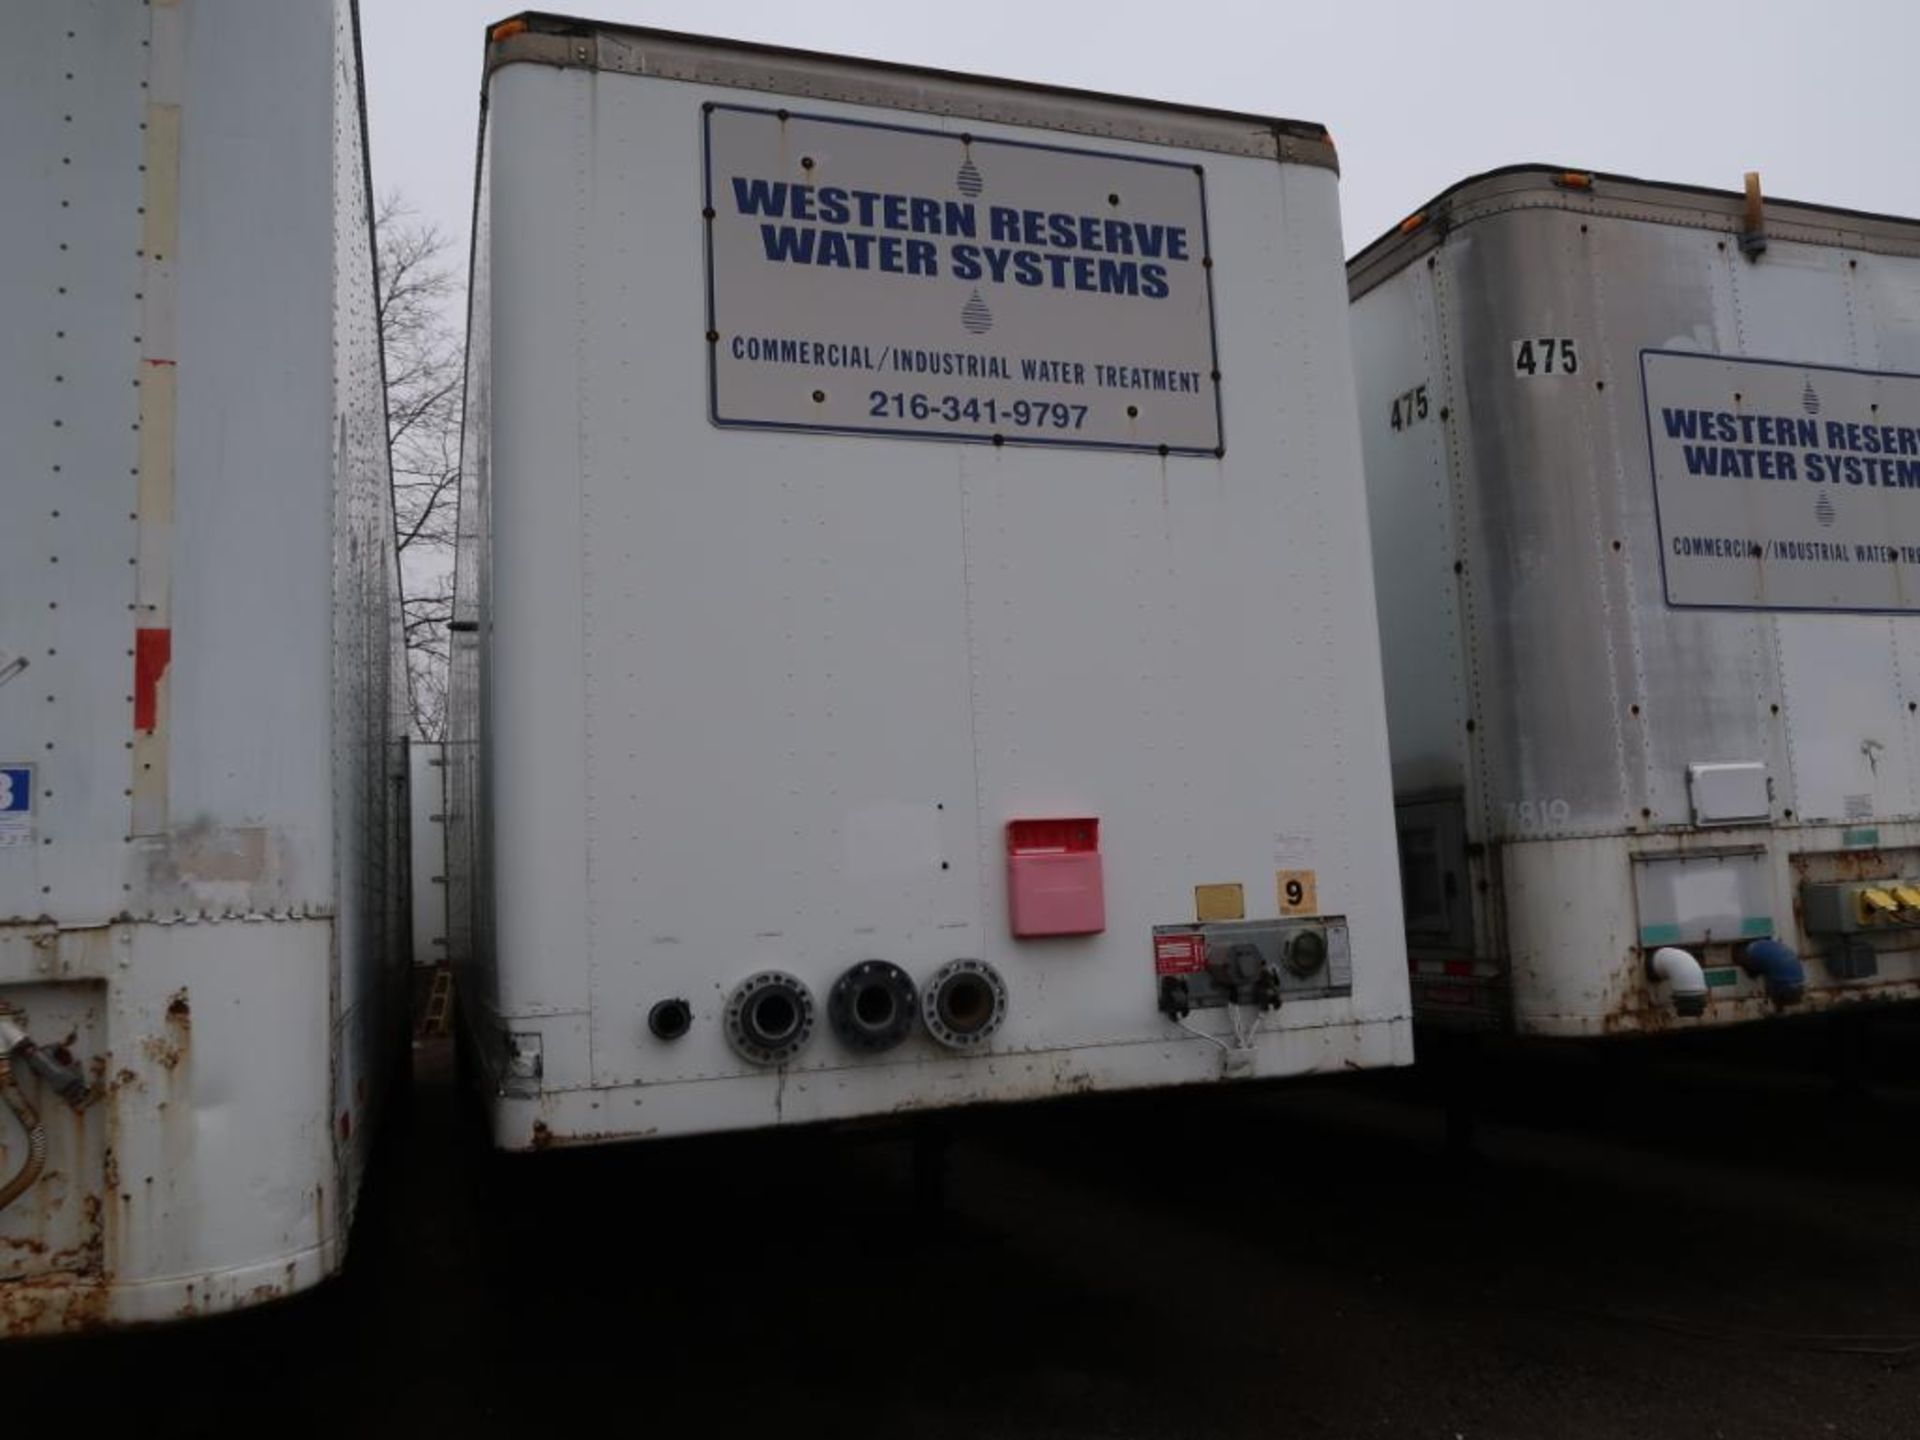 LOT: 53 ft. 2006 STRICK Mobile RO/MM Filtration Trailer, 180 GPM RO, (2) Grundfos 230 GPM Pumps, MDL - Image 20 of 24